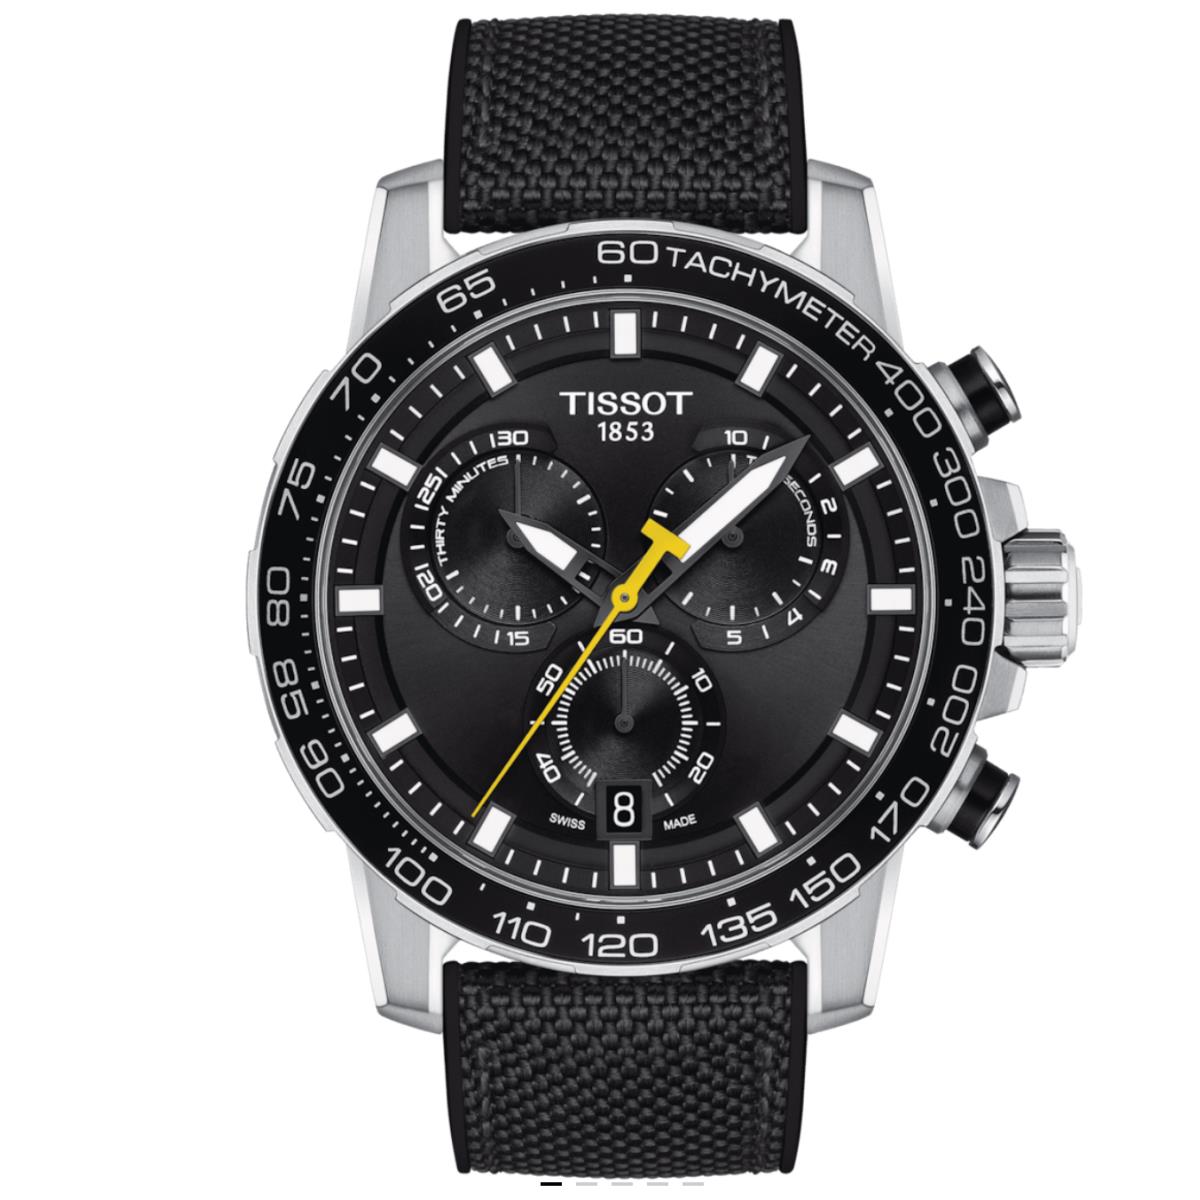 Tissot T1256171705102 Supersport Mens Watch Black Dial Band Chronograph